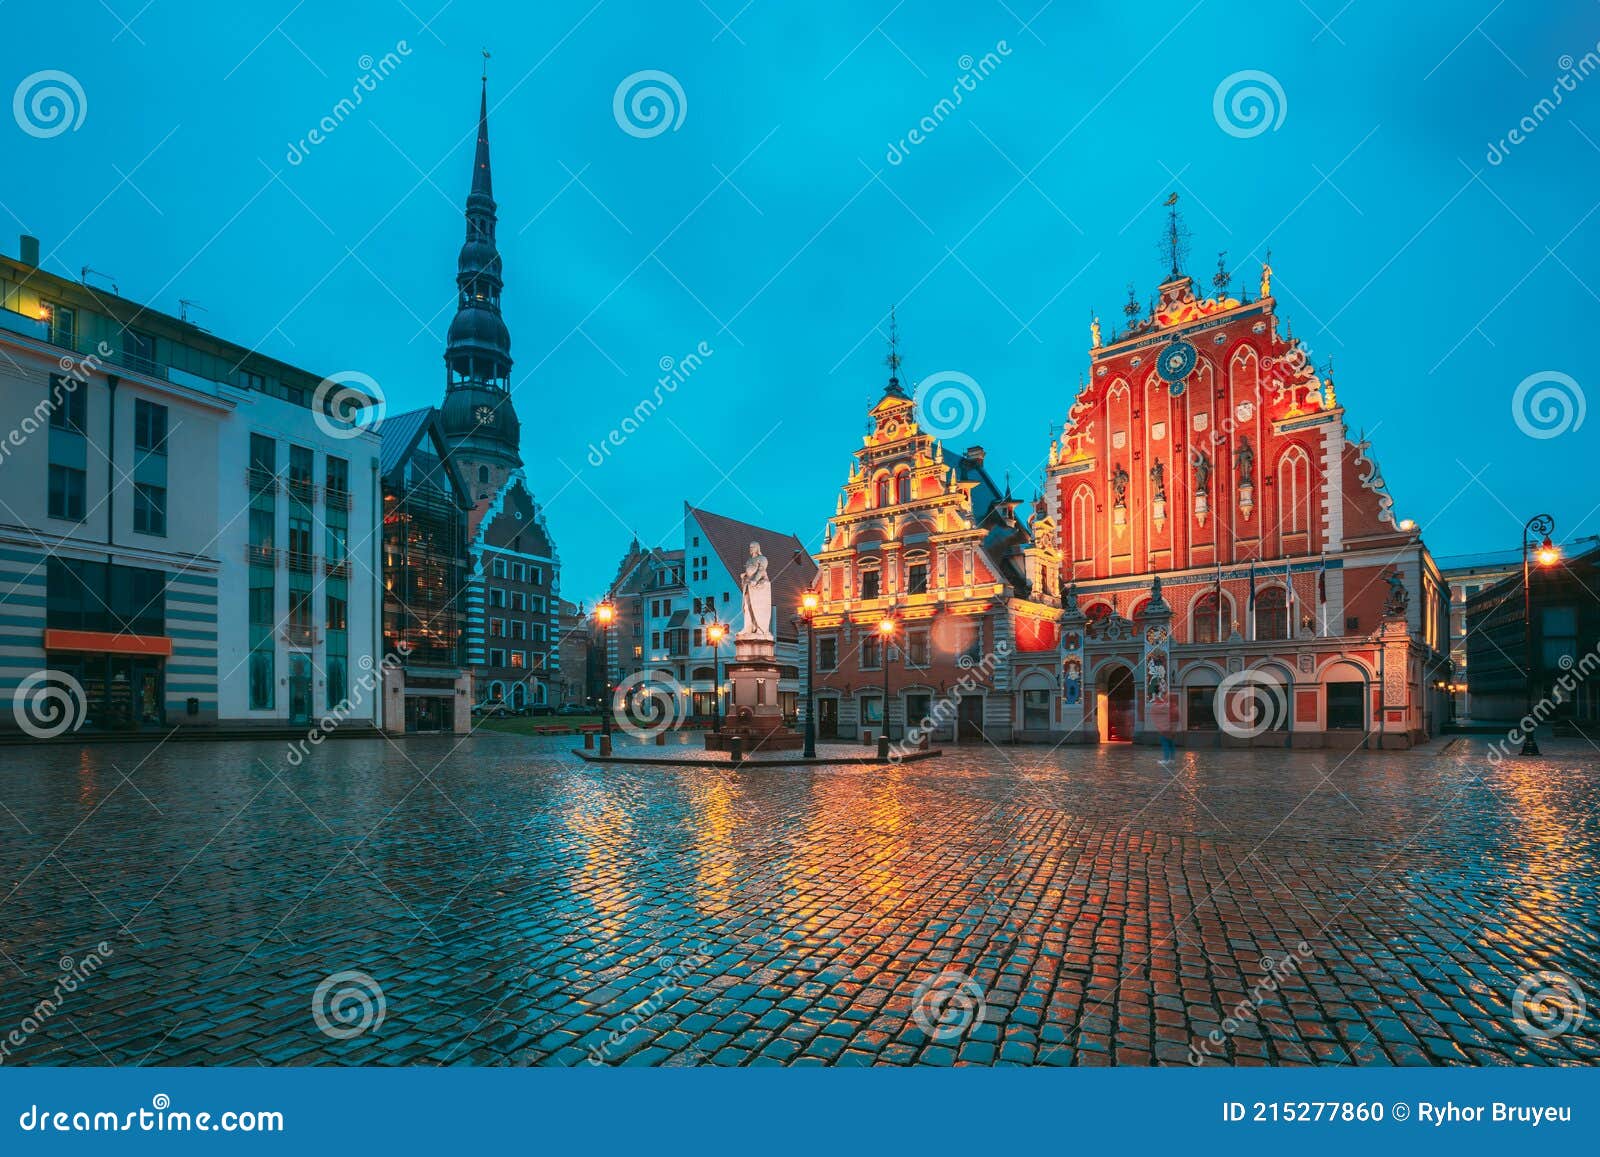 riga, latvia. scenic town hall square with st. peter's church, schwabe house, house of blackheads during night rain